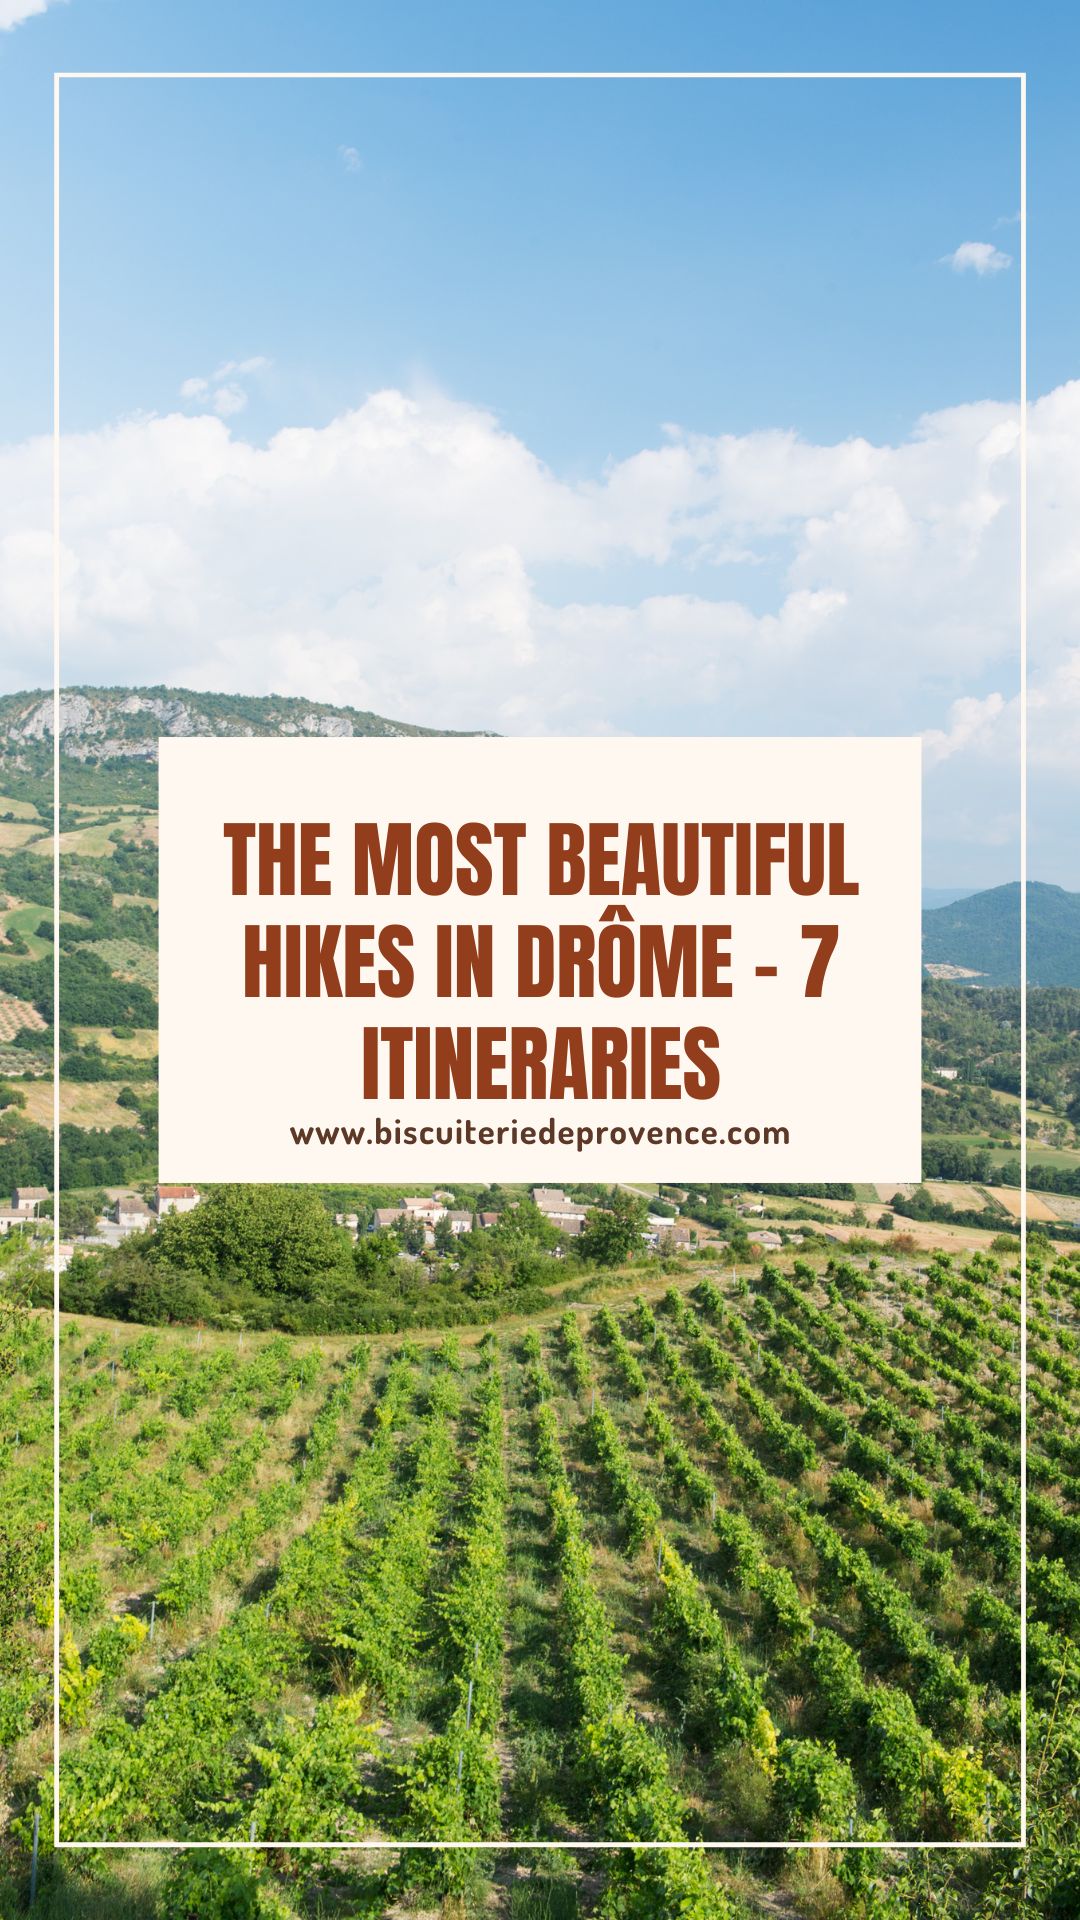 hikes in drome provencal